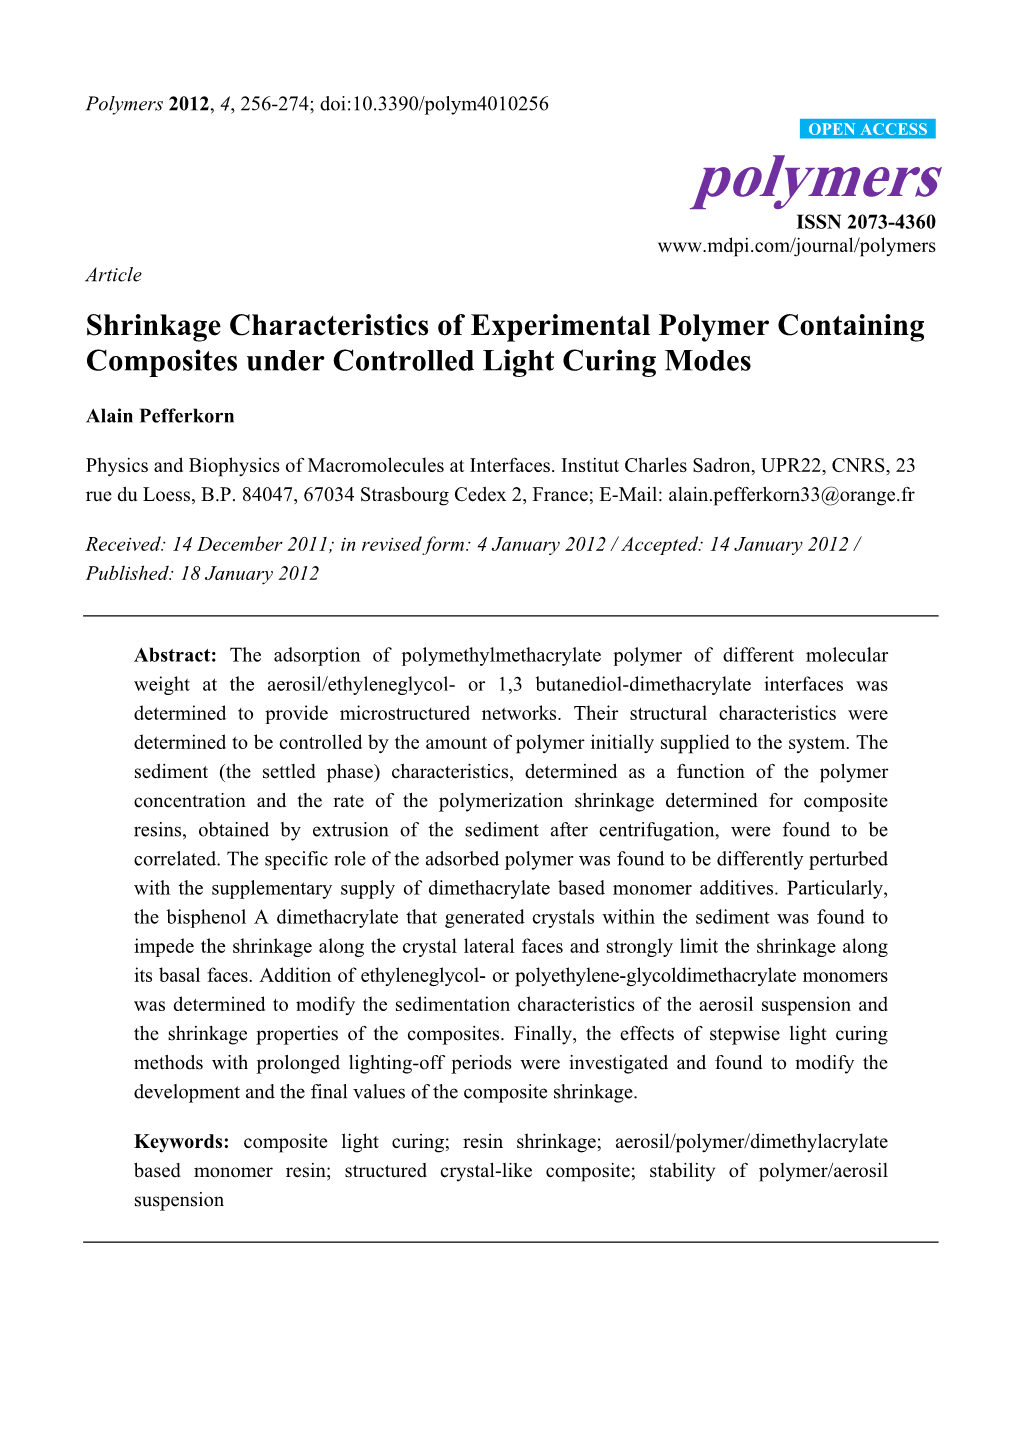 Shrinkage Characteristics of Experimental Polymer Containing Composites Under Controlled Light Curing Modes